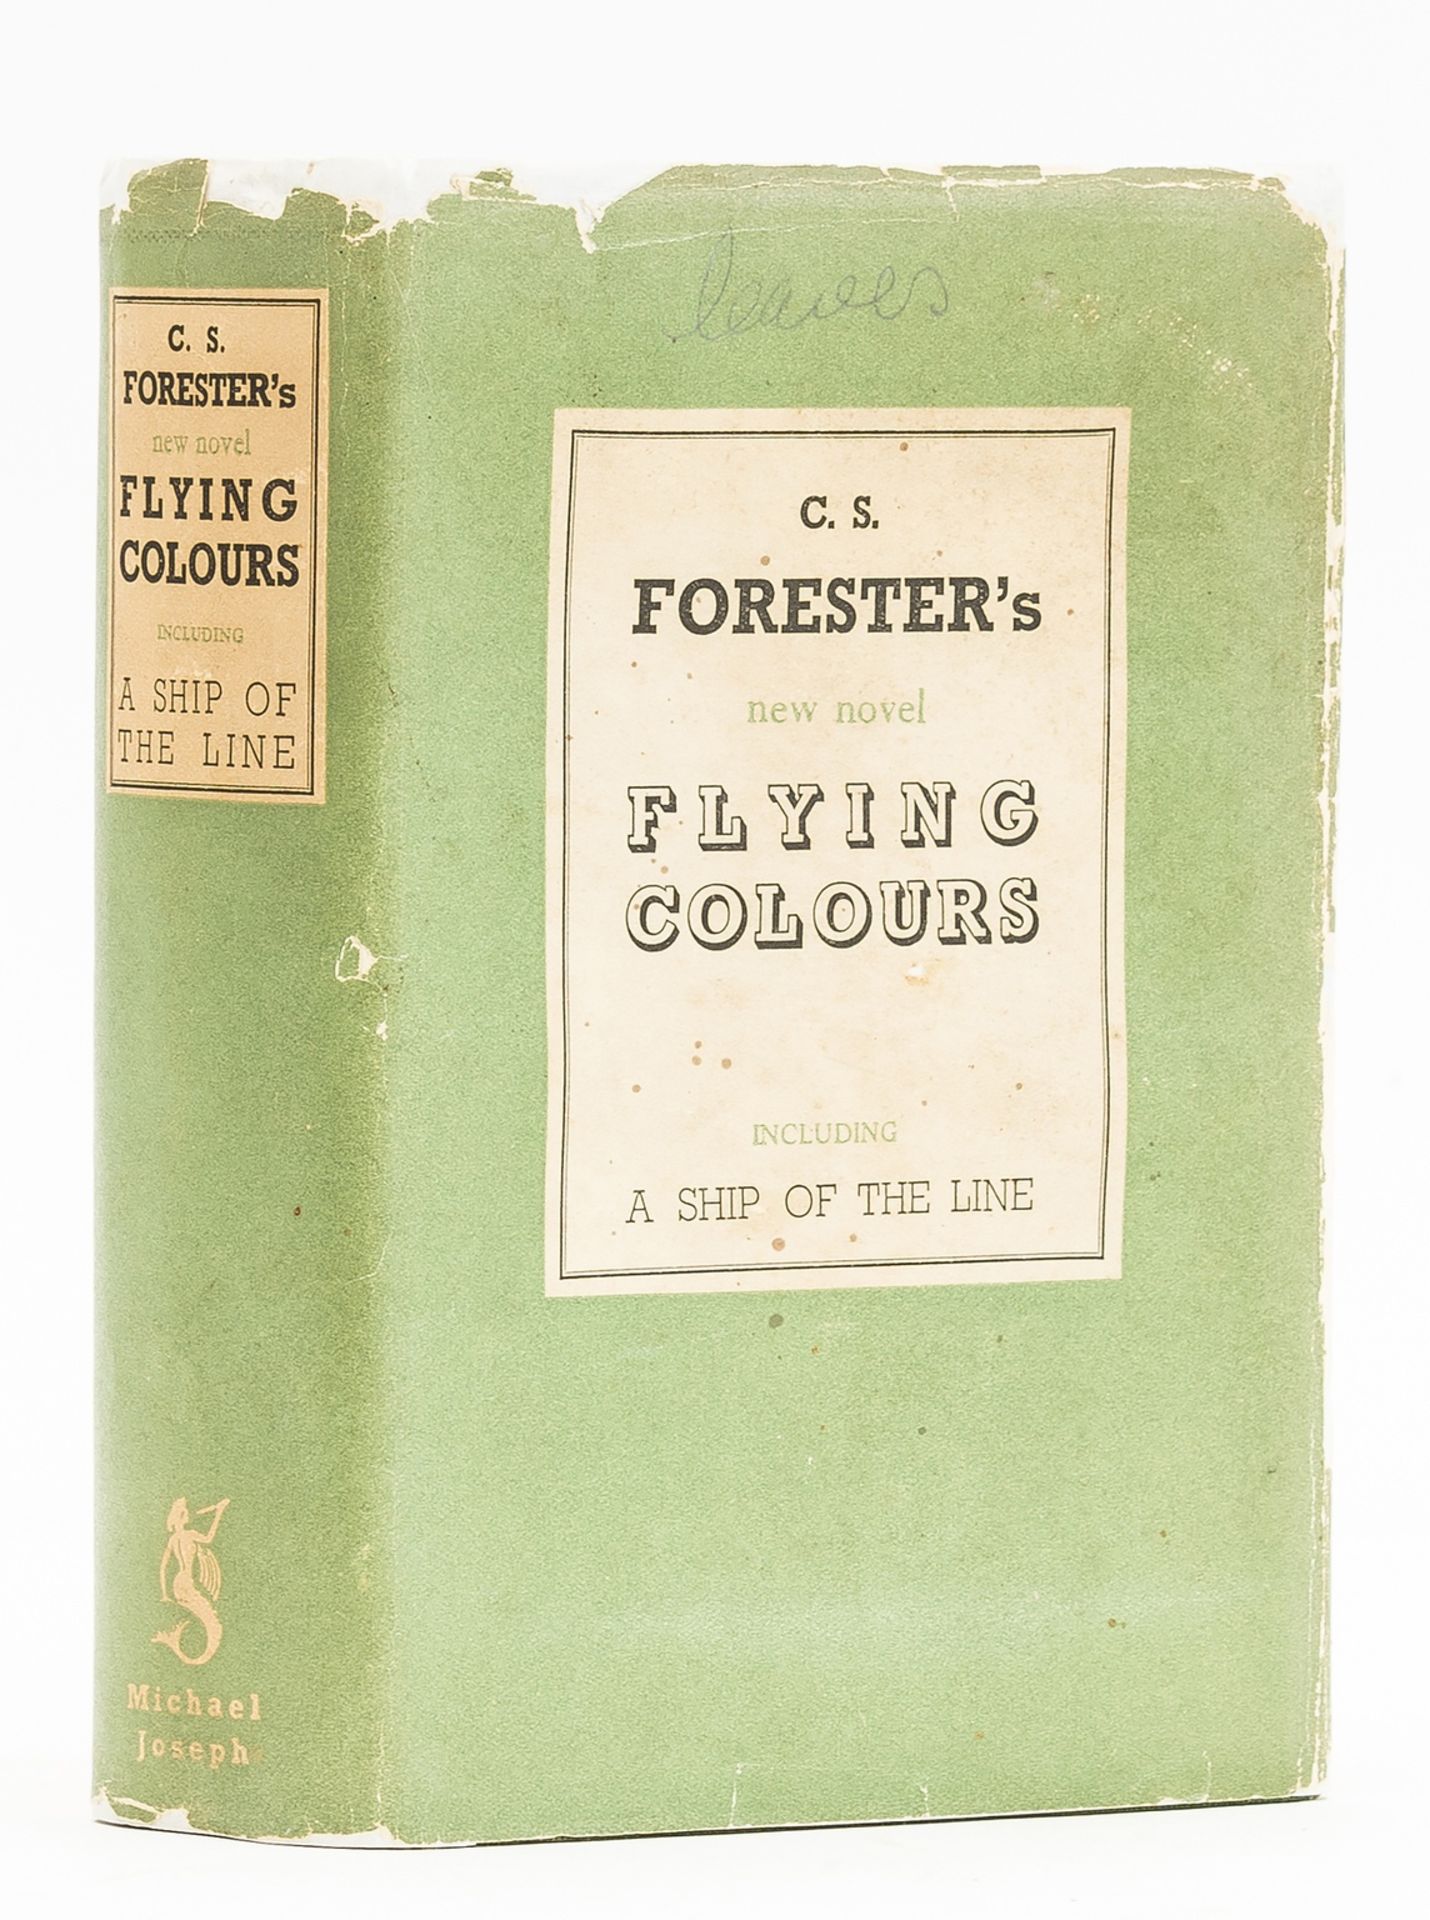 Forester (C.S.) Flying Colours. Including A Ship of the Line, first edition, 1938.